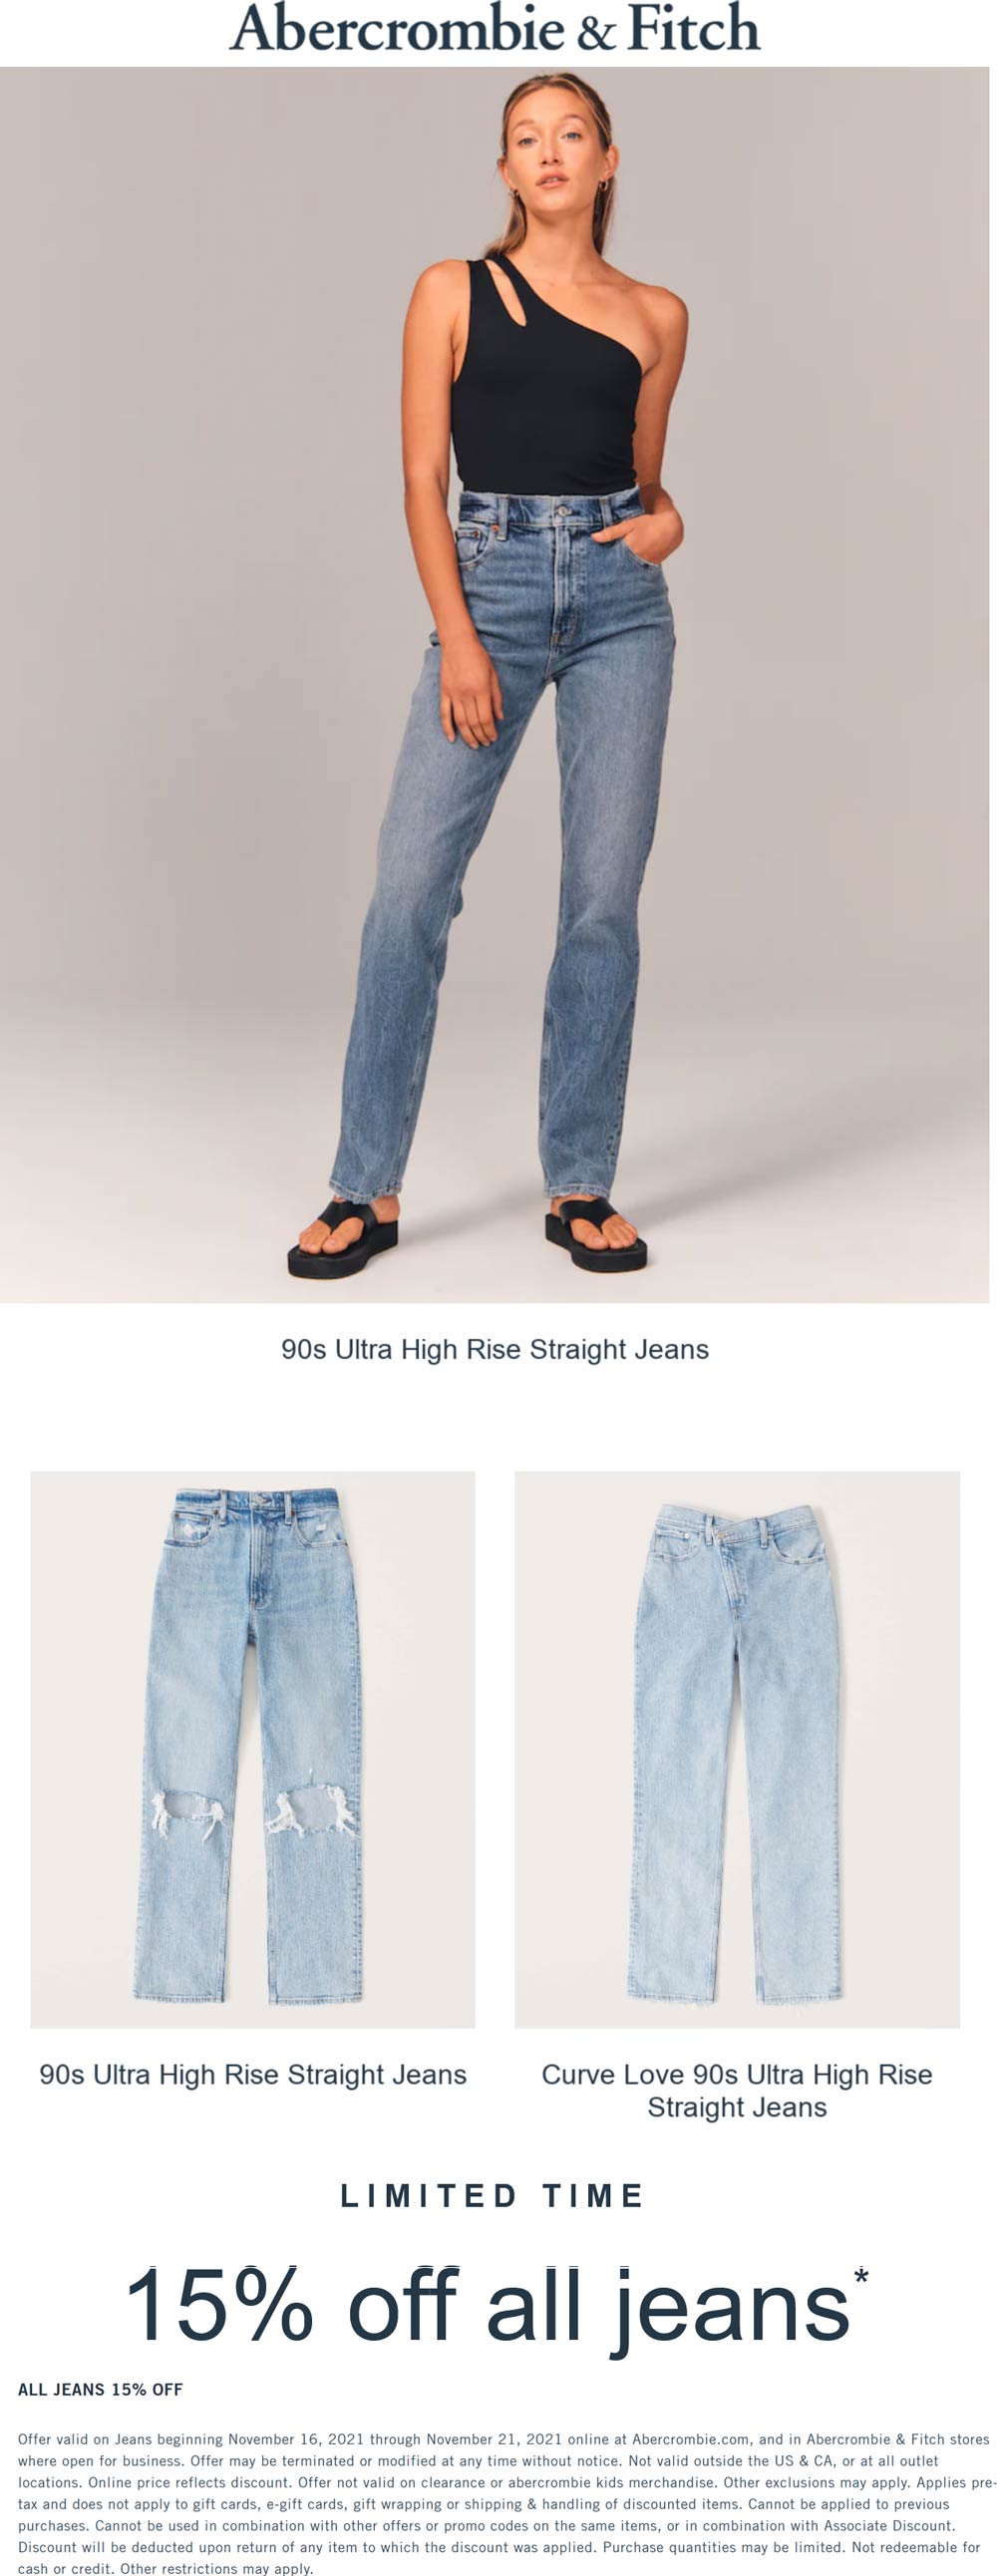 Abercrombie & Fitch stores Coupon  15% off all jeans at Abercrombie & Fitch, ditto online #abercrombiefitch 